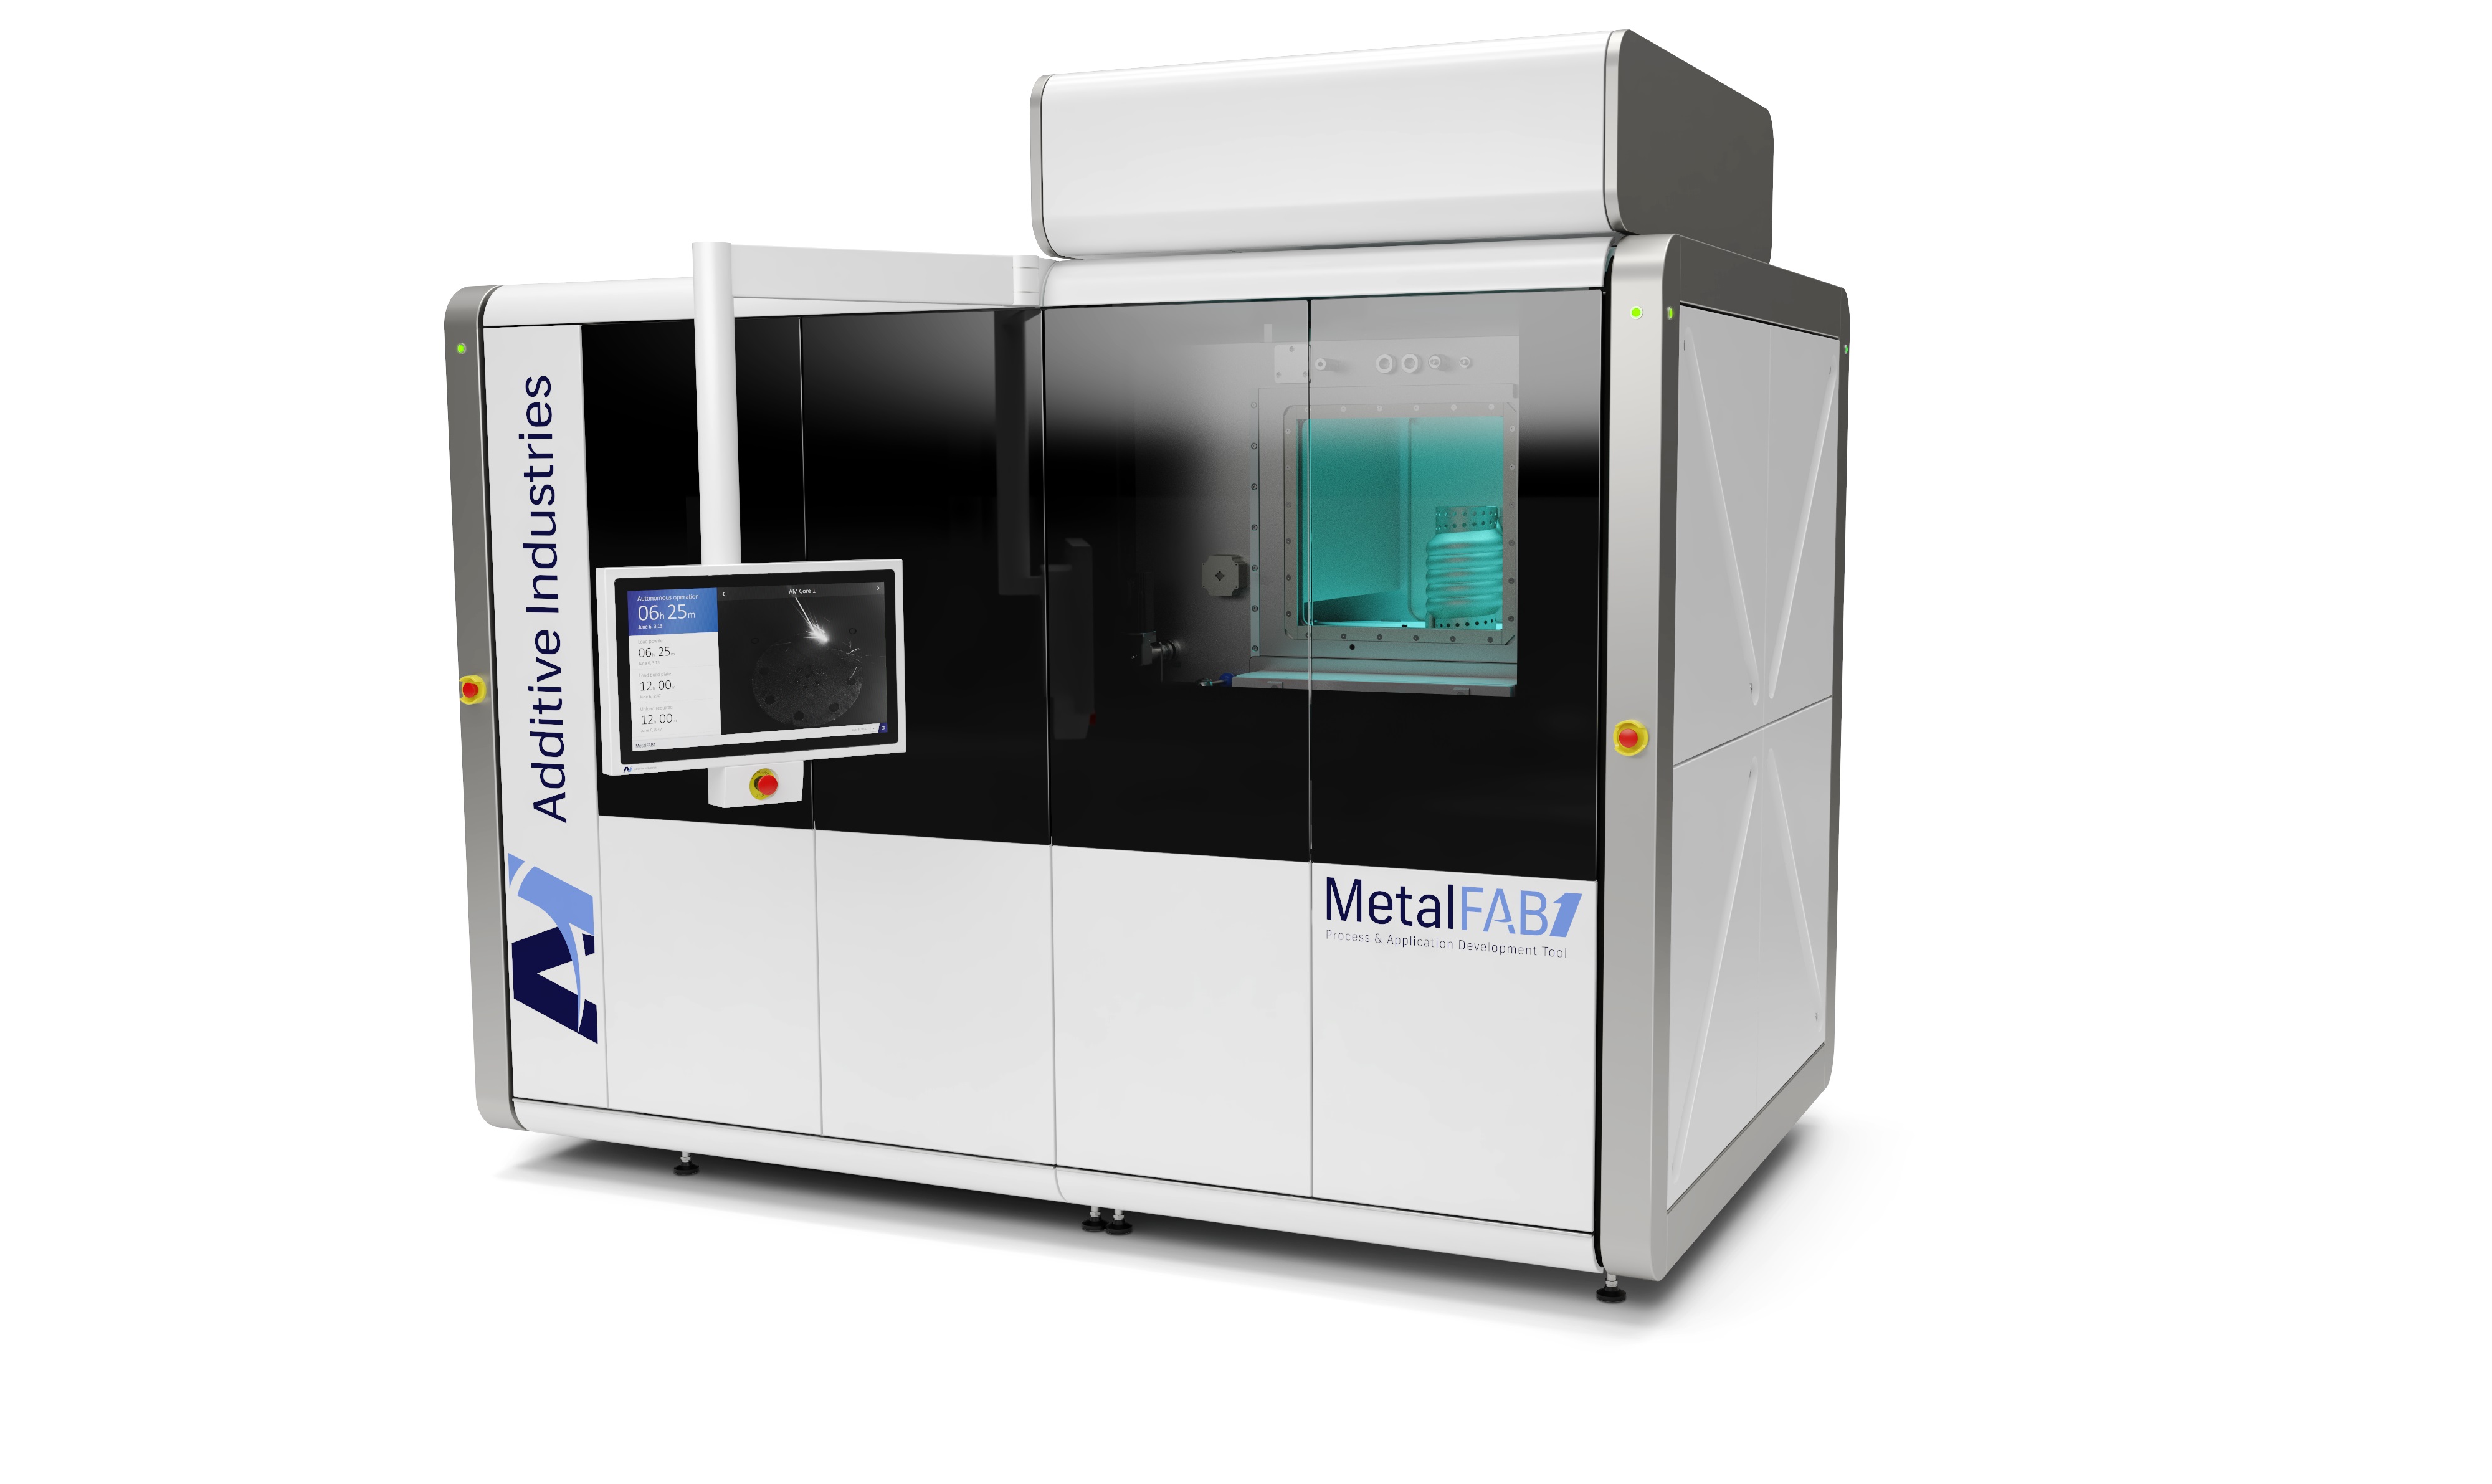 The partnership focuses on series production of applications for the aerospace industry using Additive Industries’ MetalFAB1 3D printer.